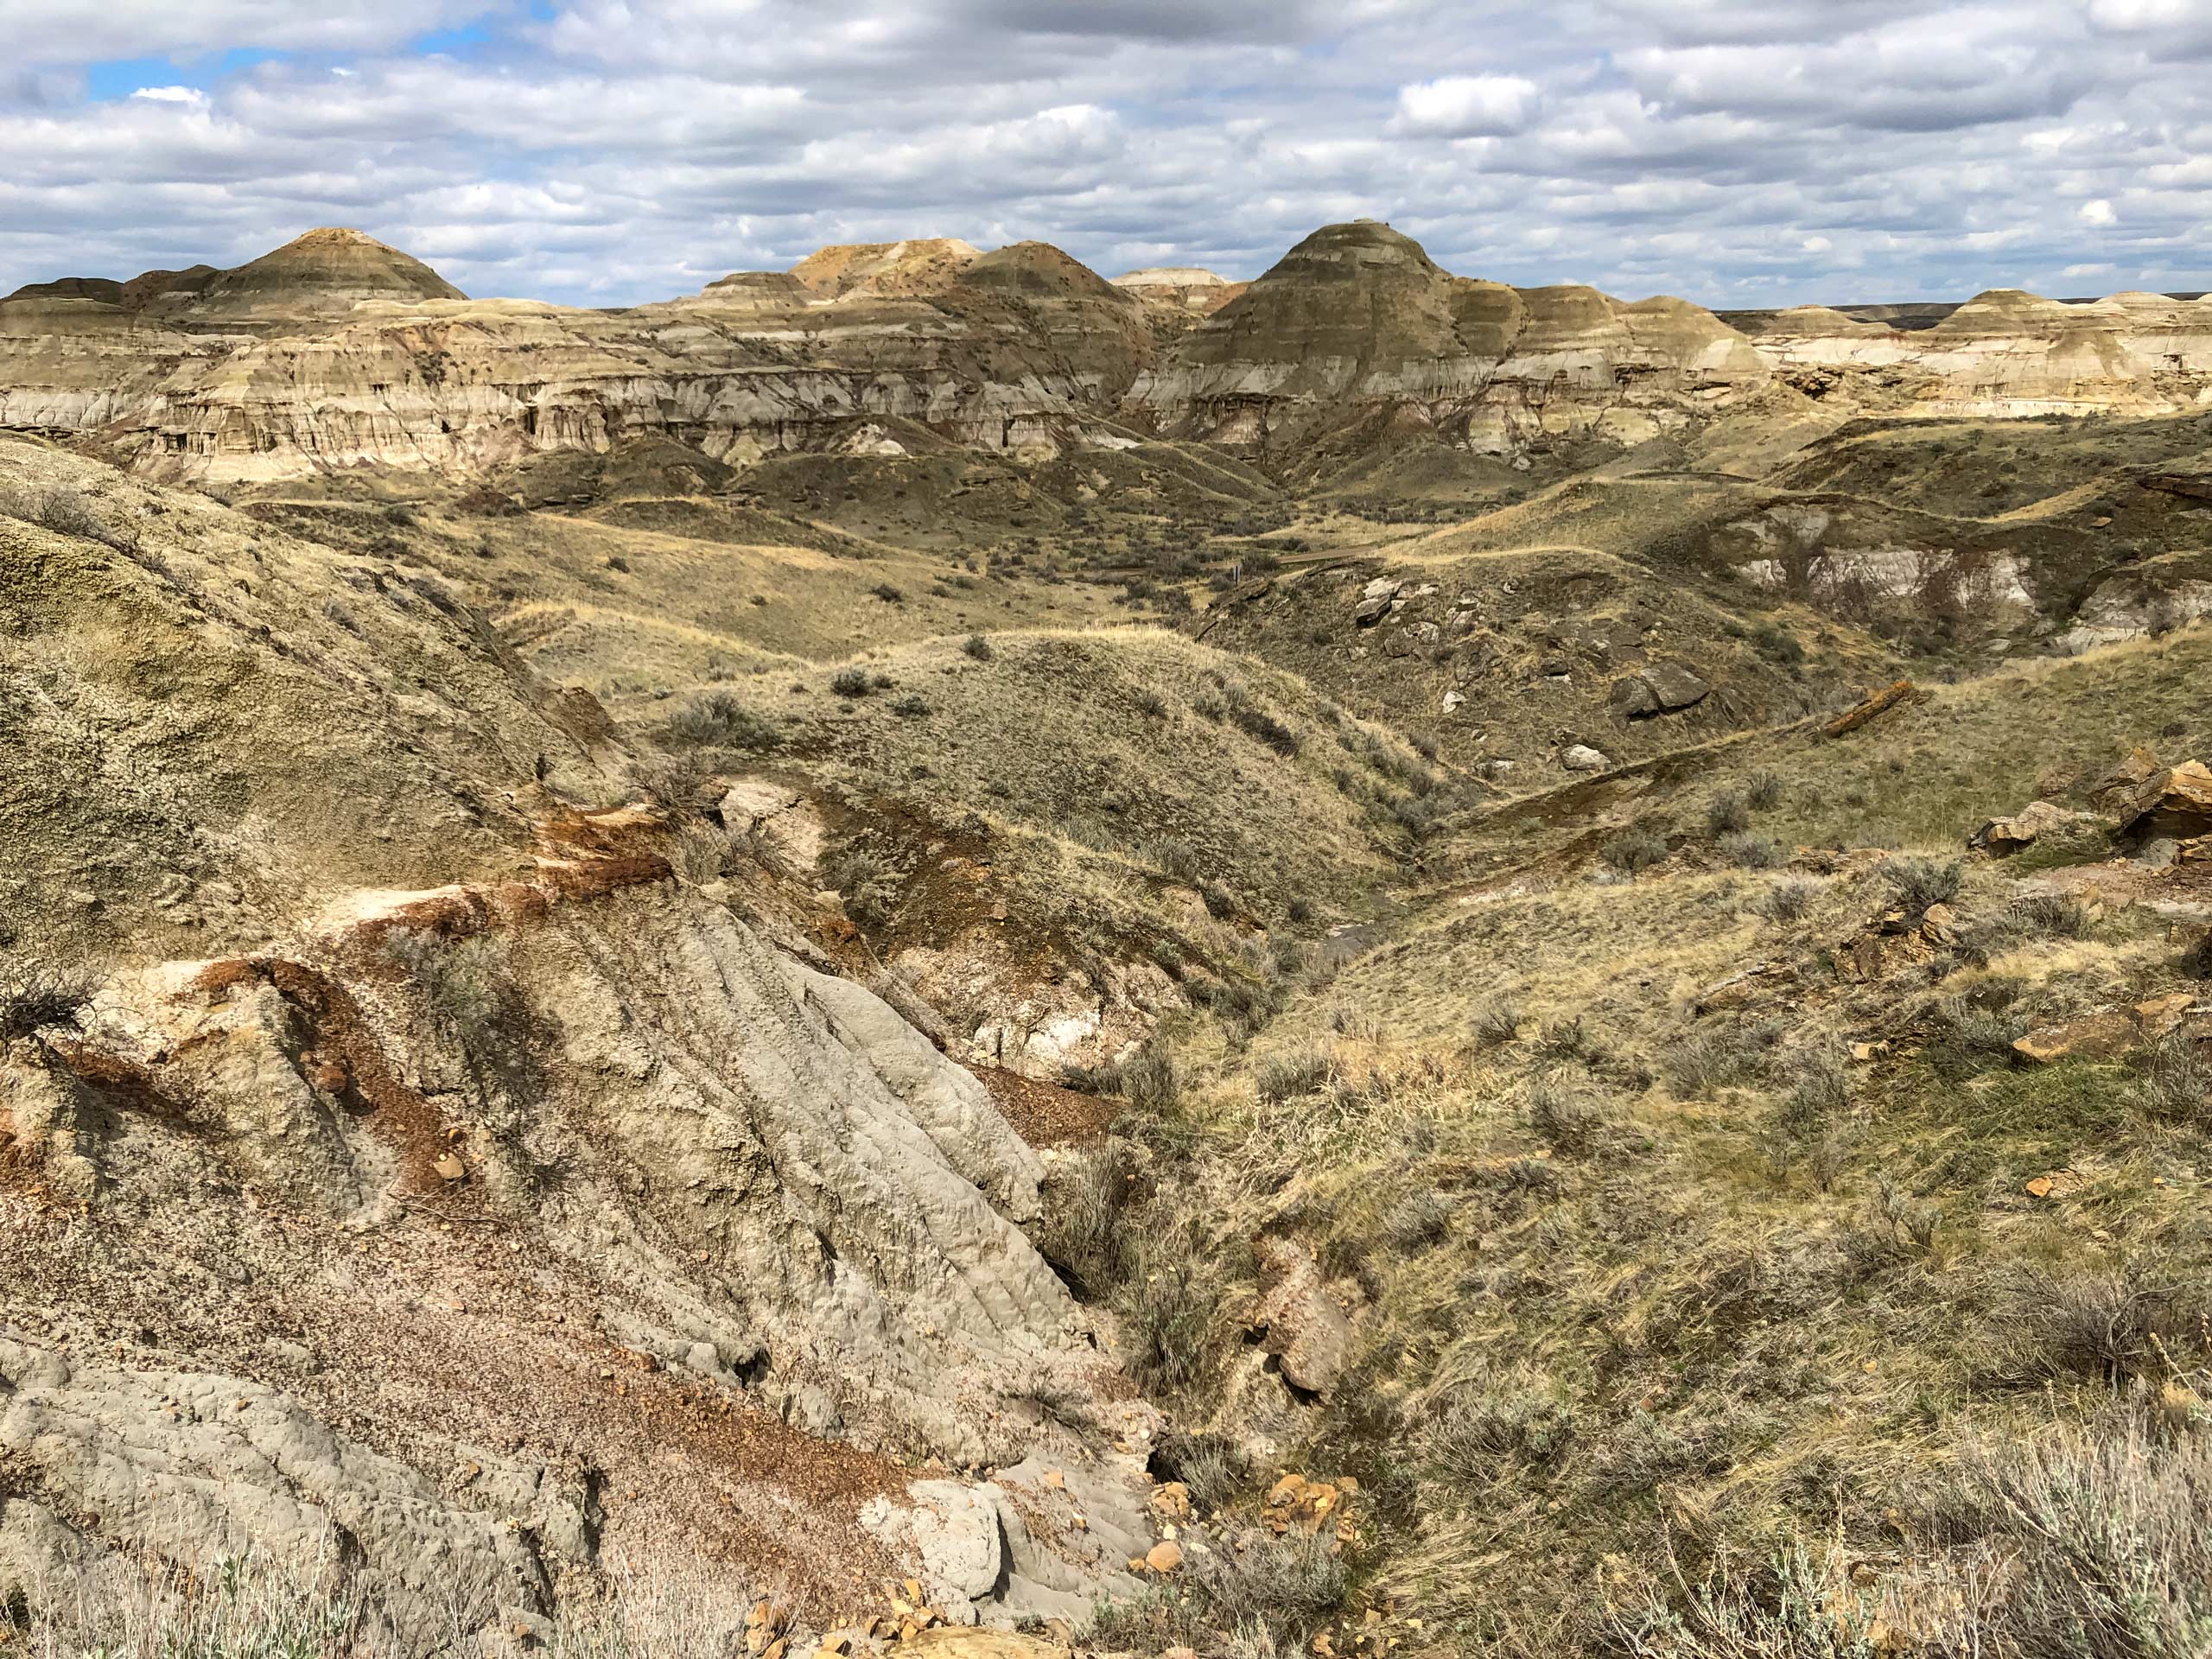 Visible rock layers in the canyons of Badlands Trail in Dinosaur Provincial Park